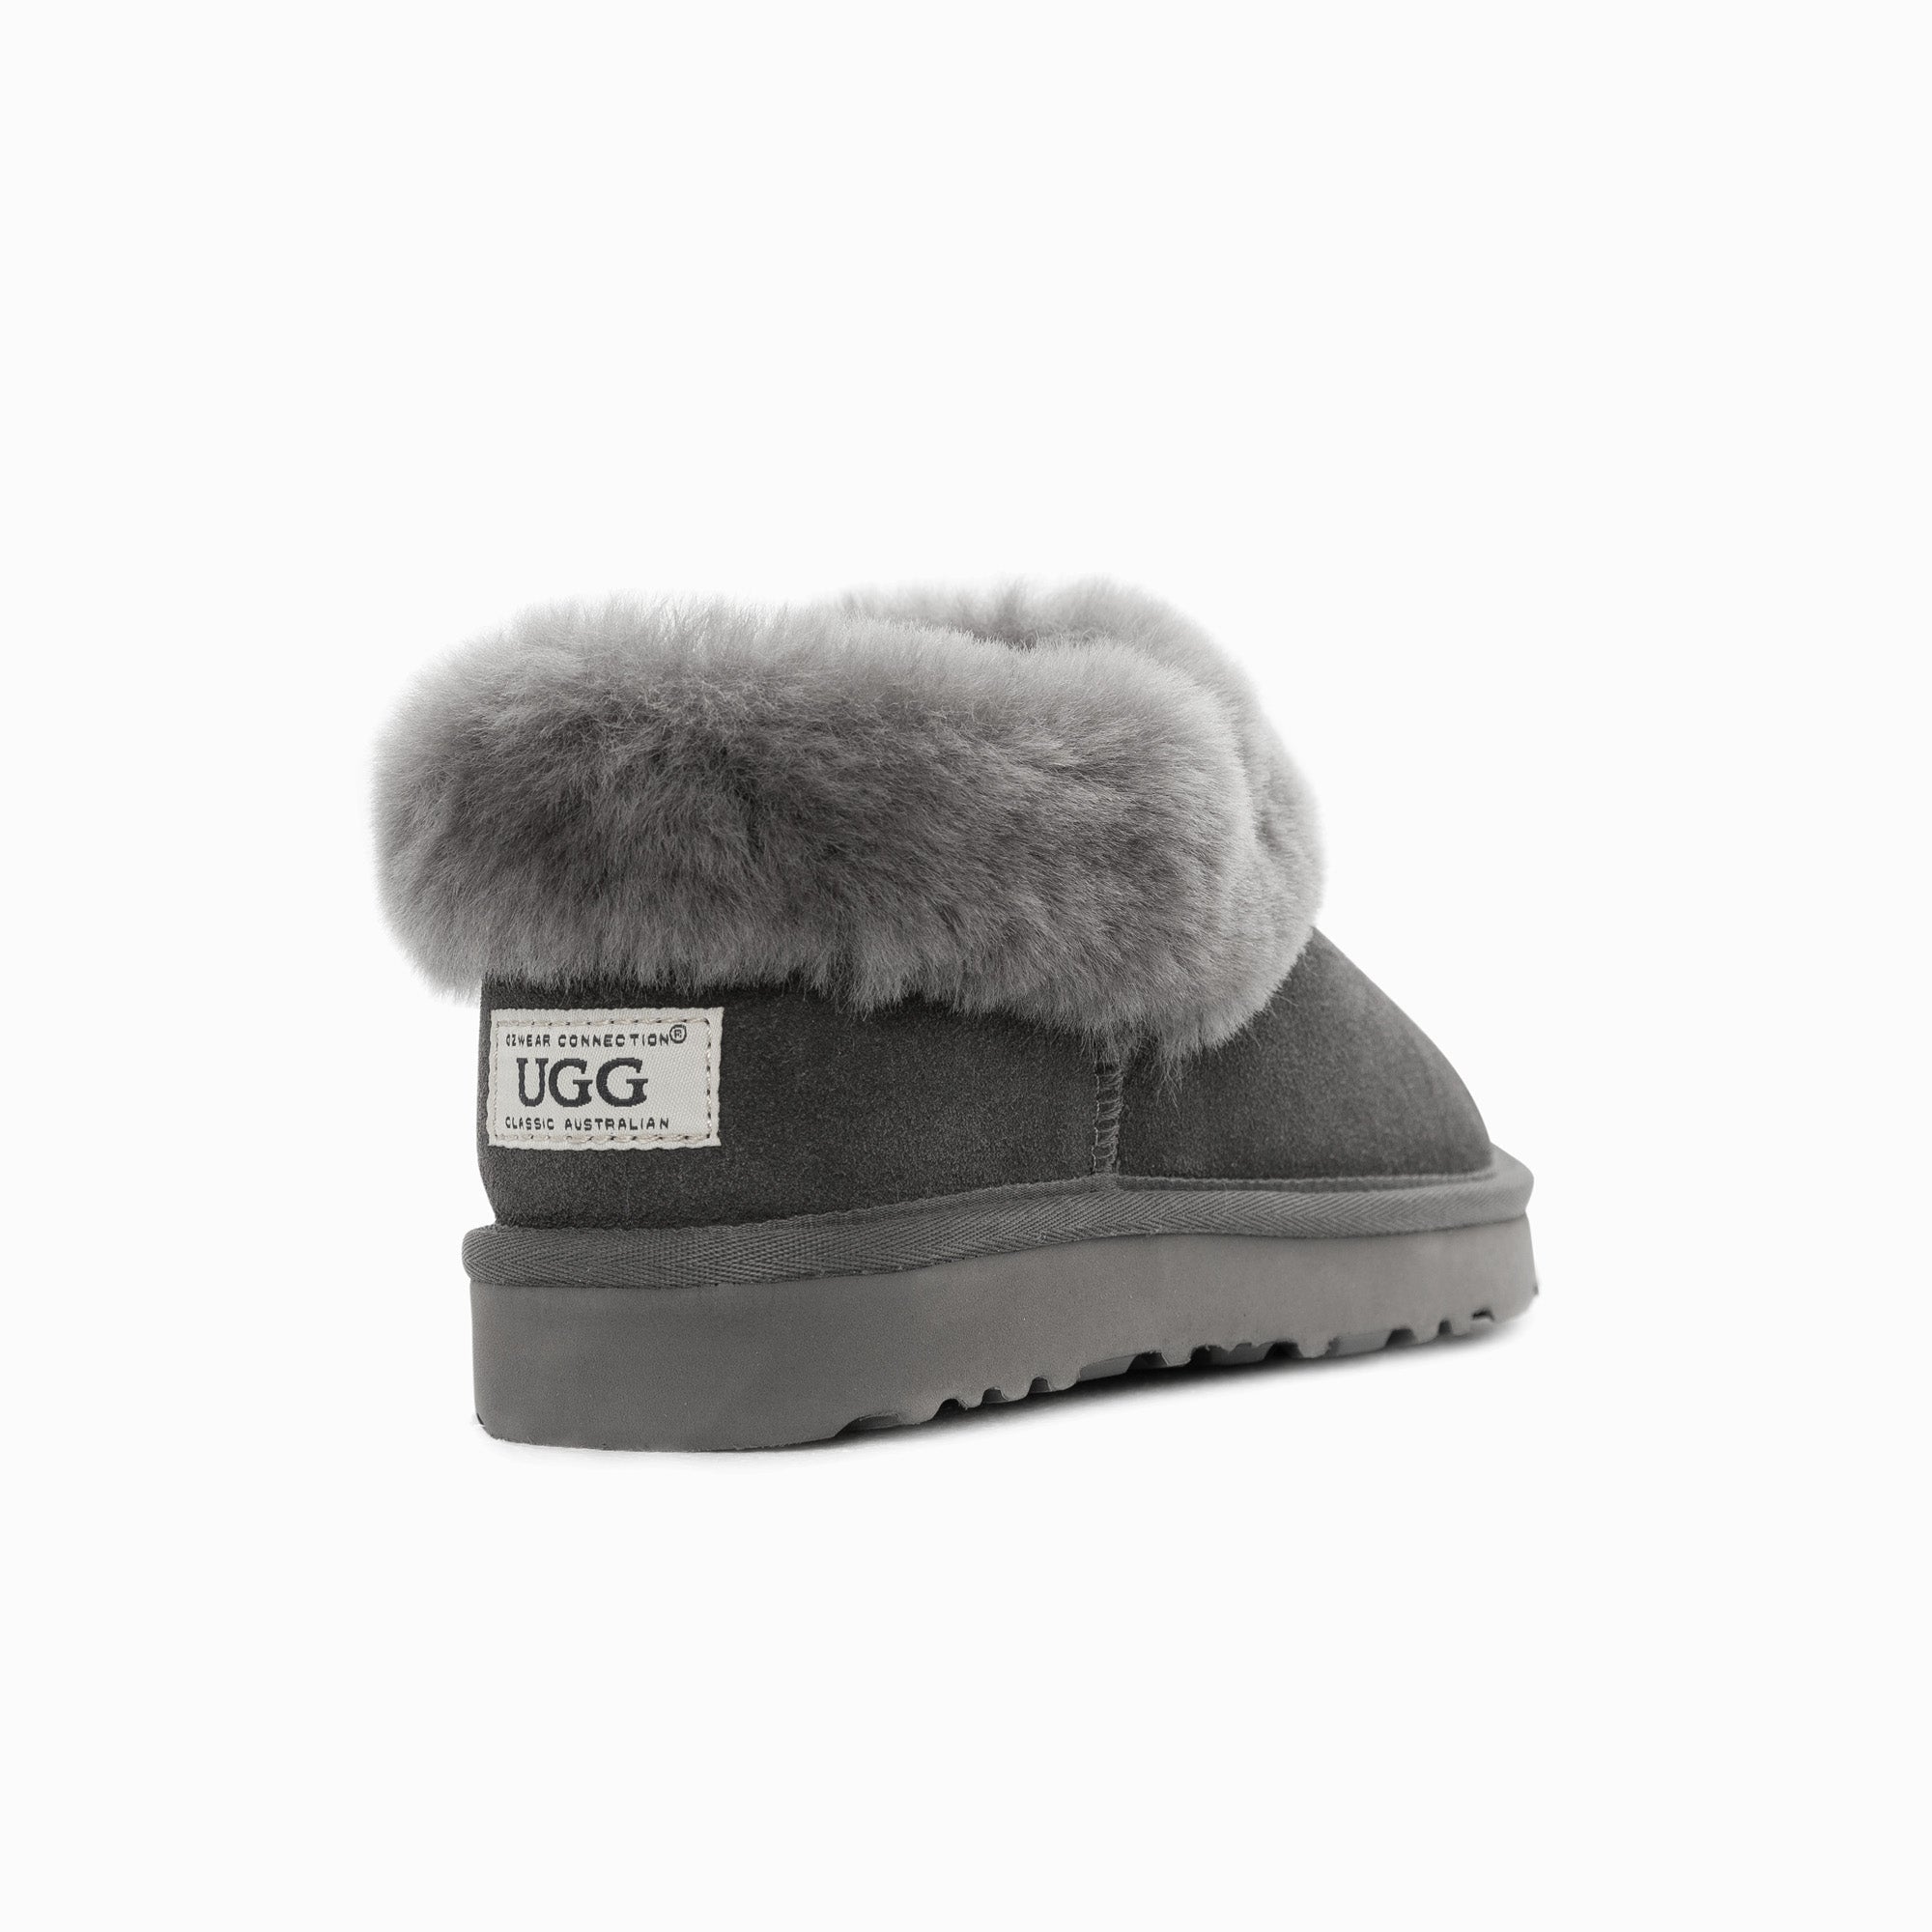 Ugg Slippers Avery Unisex Premium Sheepskin Slippers Suede-Slippers-PEROZ Accessories